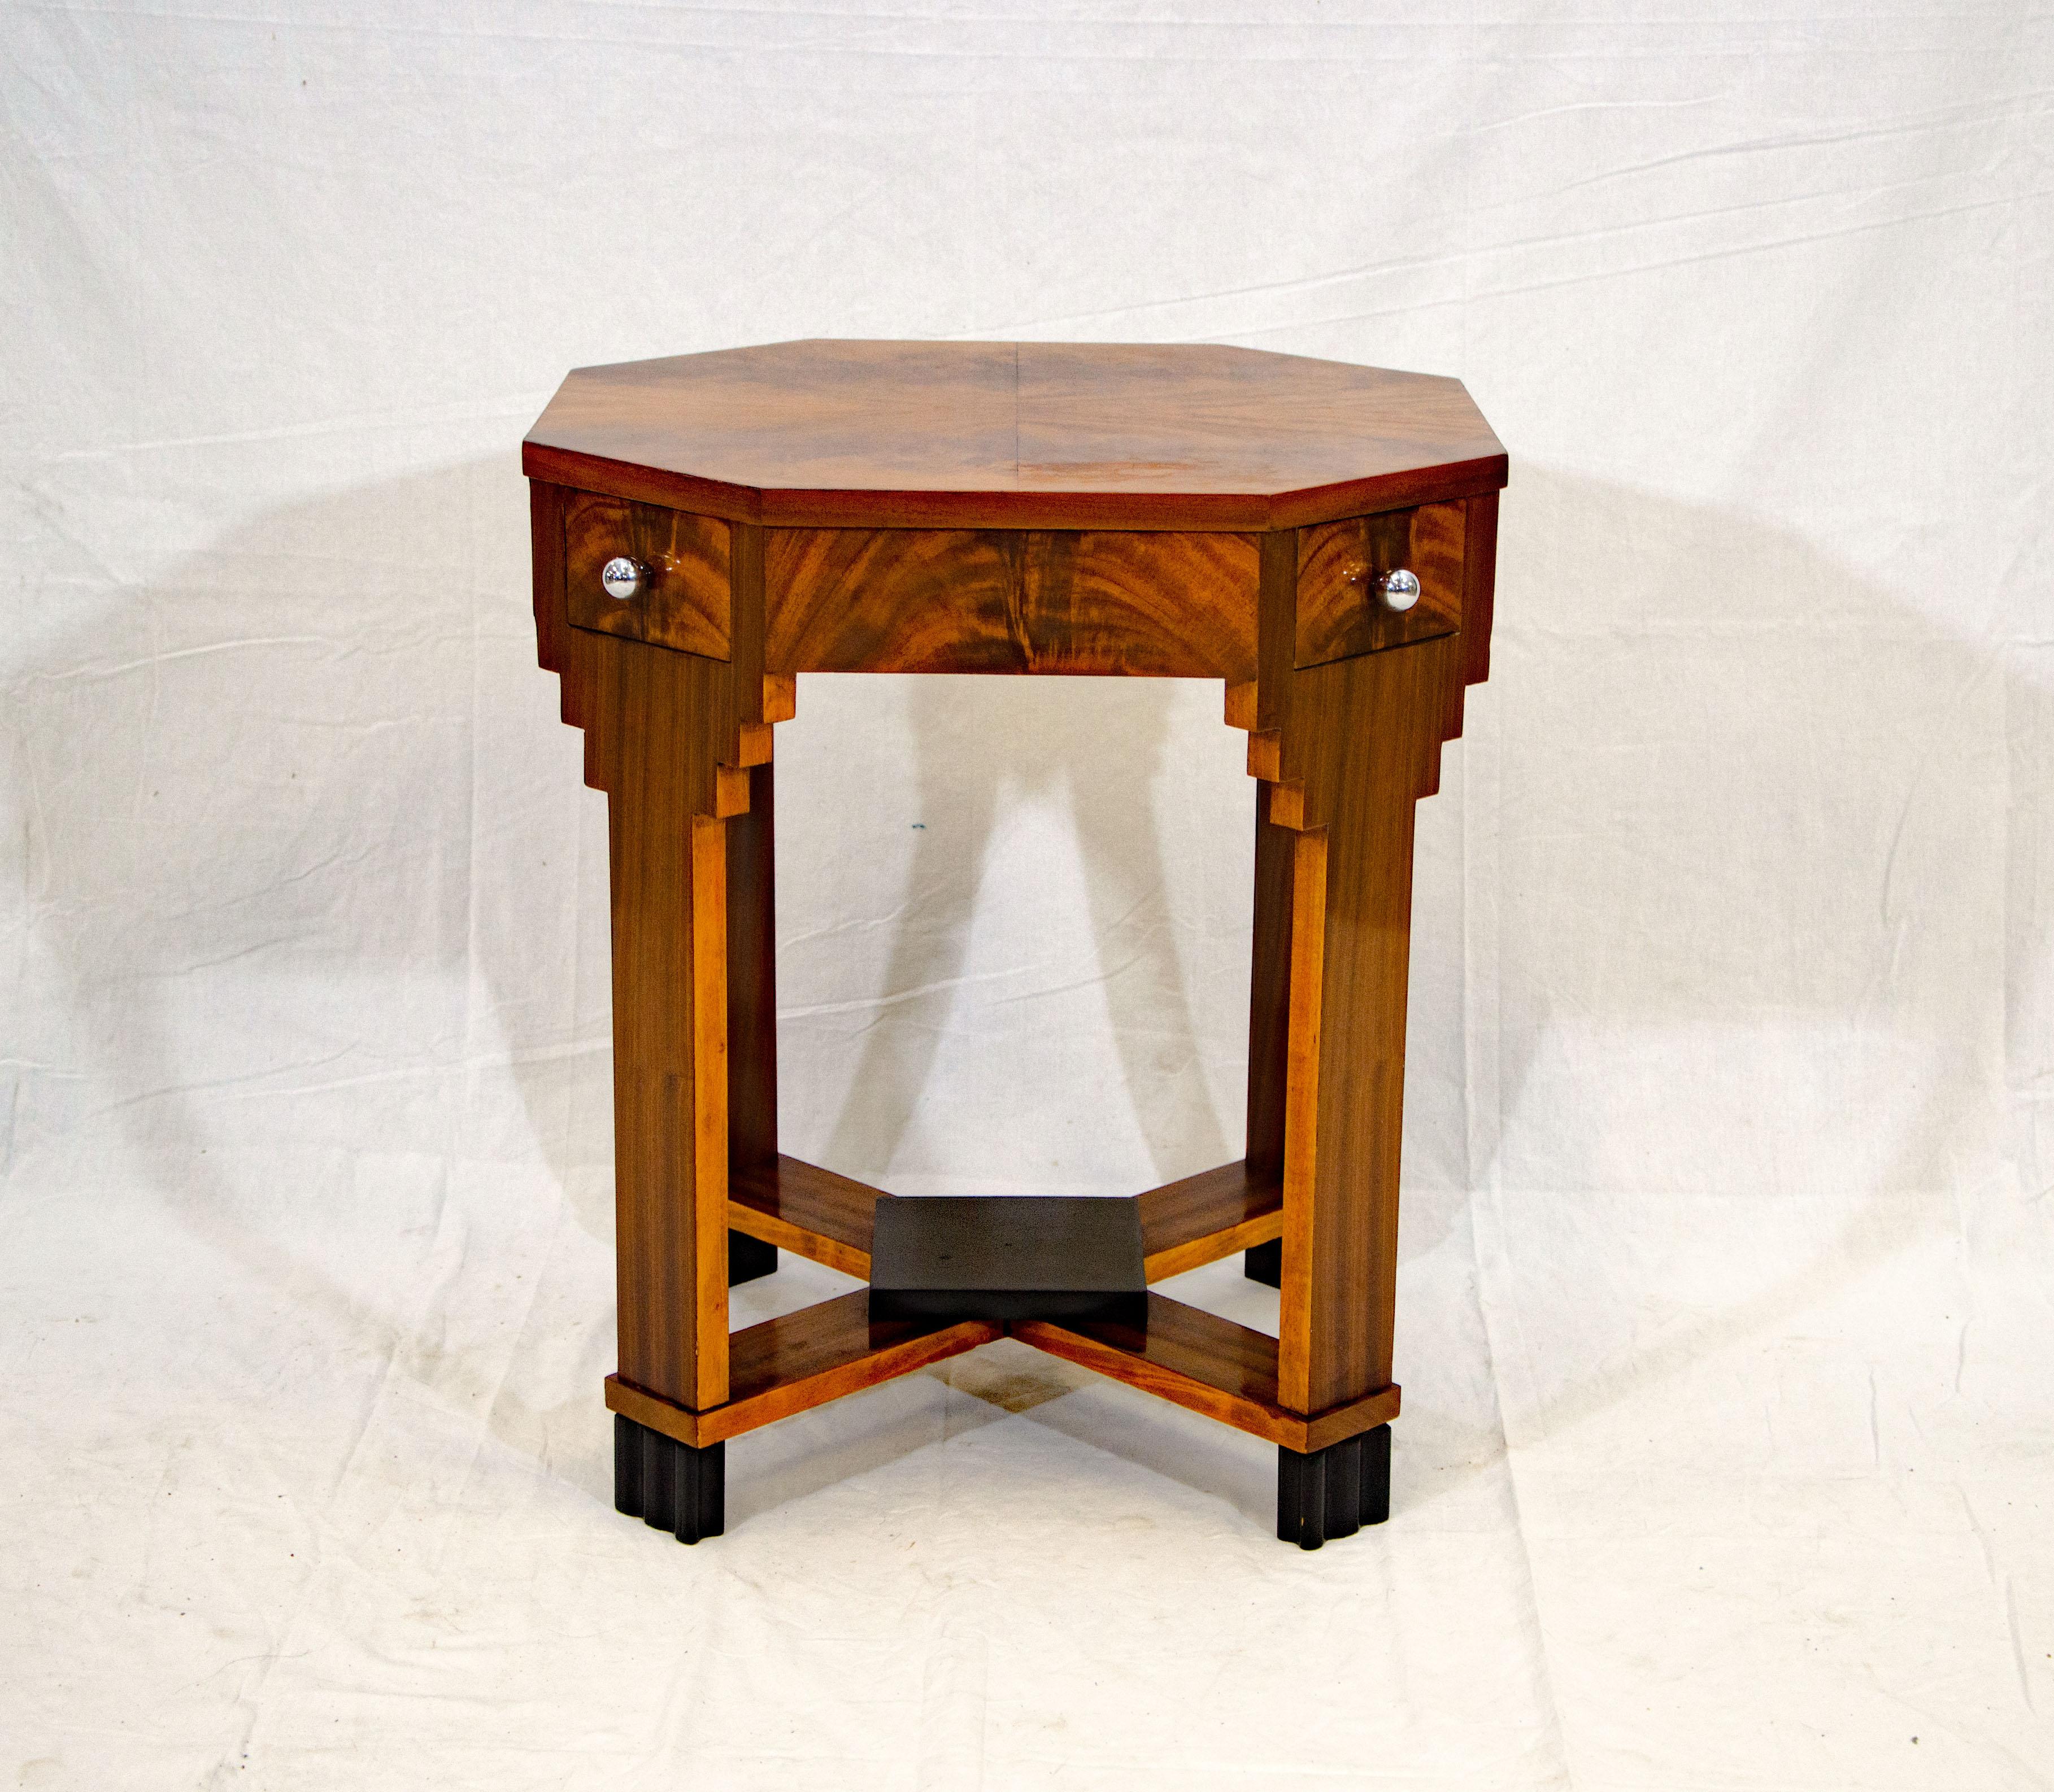 Nice French Art Deco octagonal occasional table with four small drawers accented with chrome knobs. A skyscraper design accents the top part of the legs. The bottom of the legs and the small shelf on the criss-cross leg design have a black lacquer